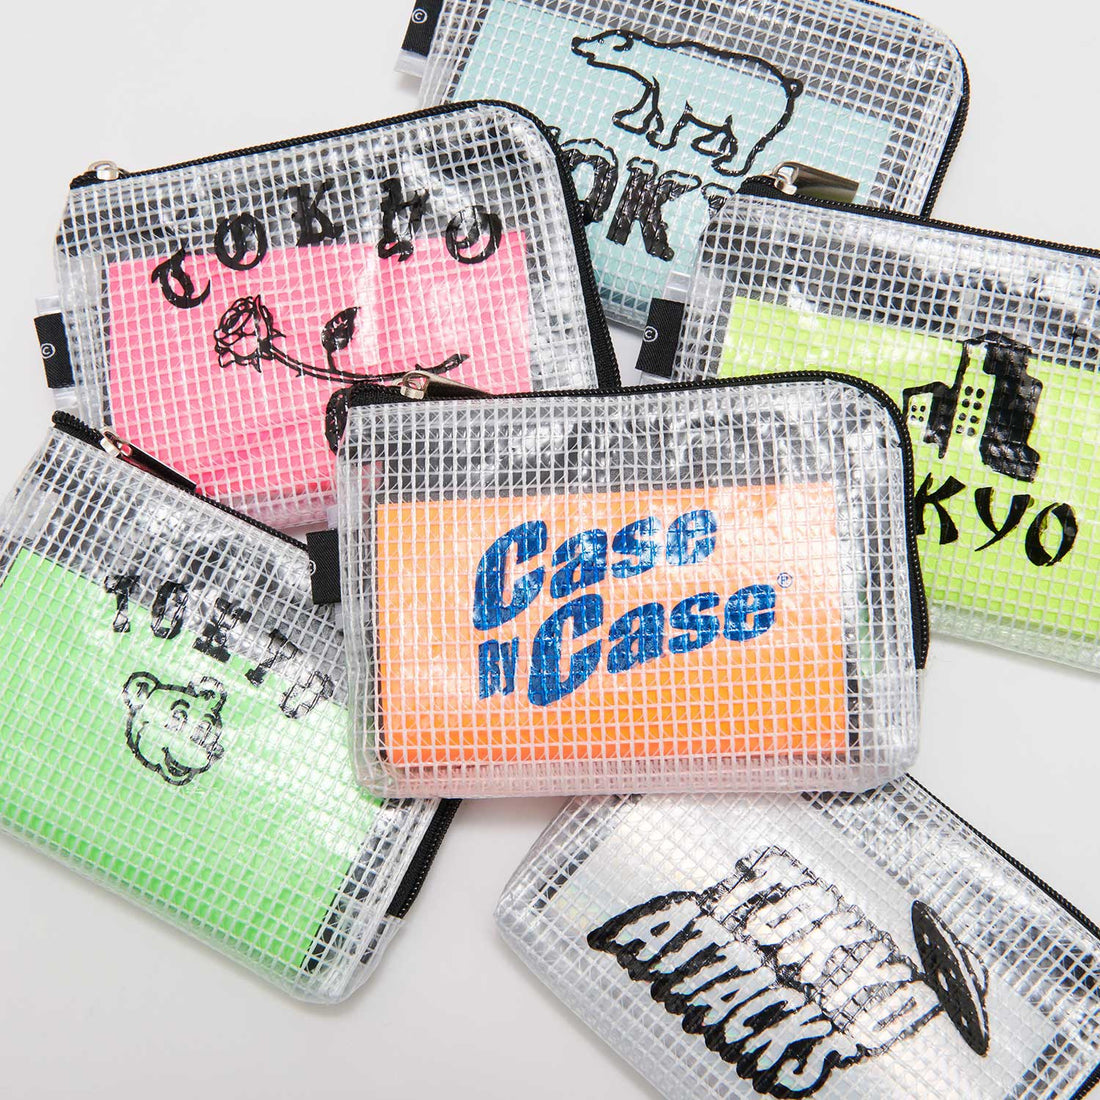 【CASE BY CASE】CARD CASE カードケース